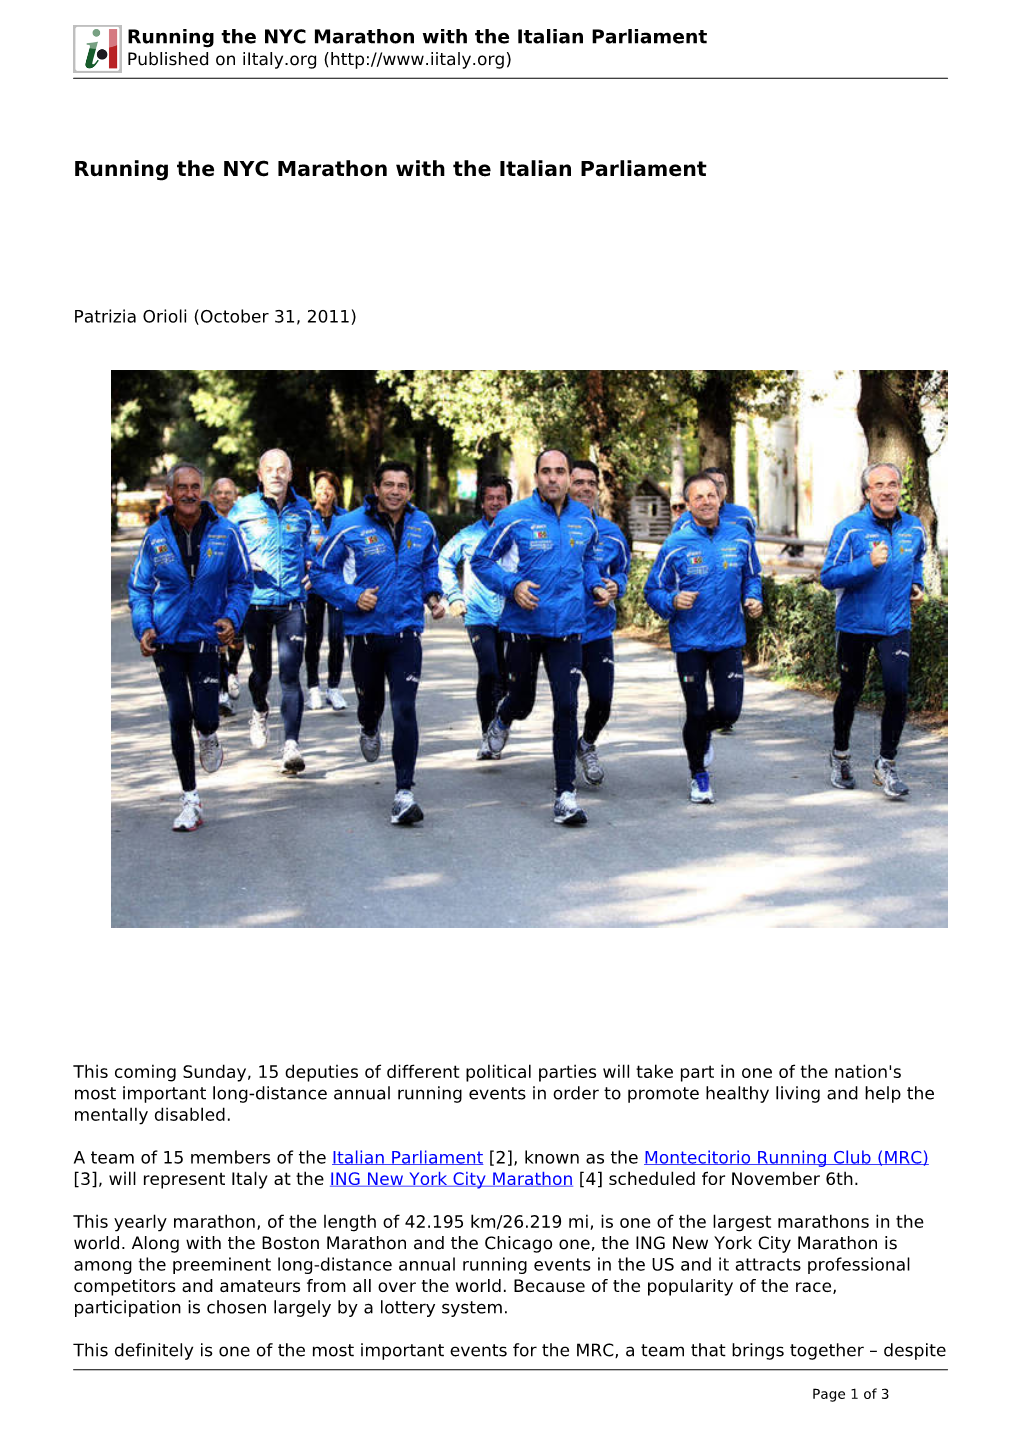 Running the NYC Marathon with the Italian Parliament Published on Iitaly.Org (